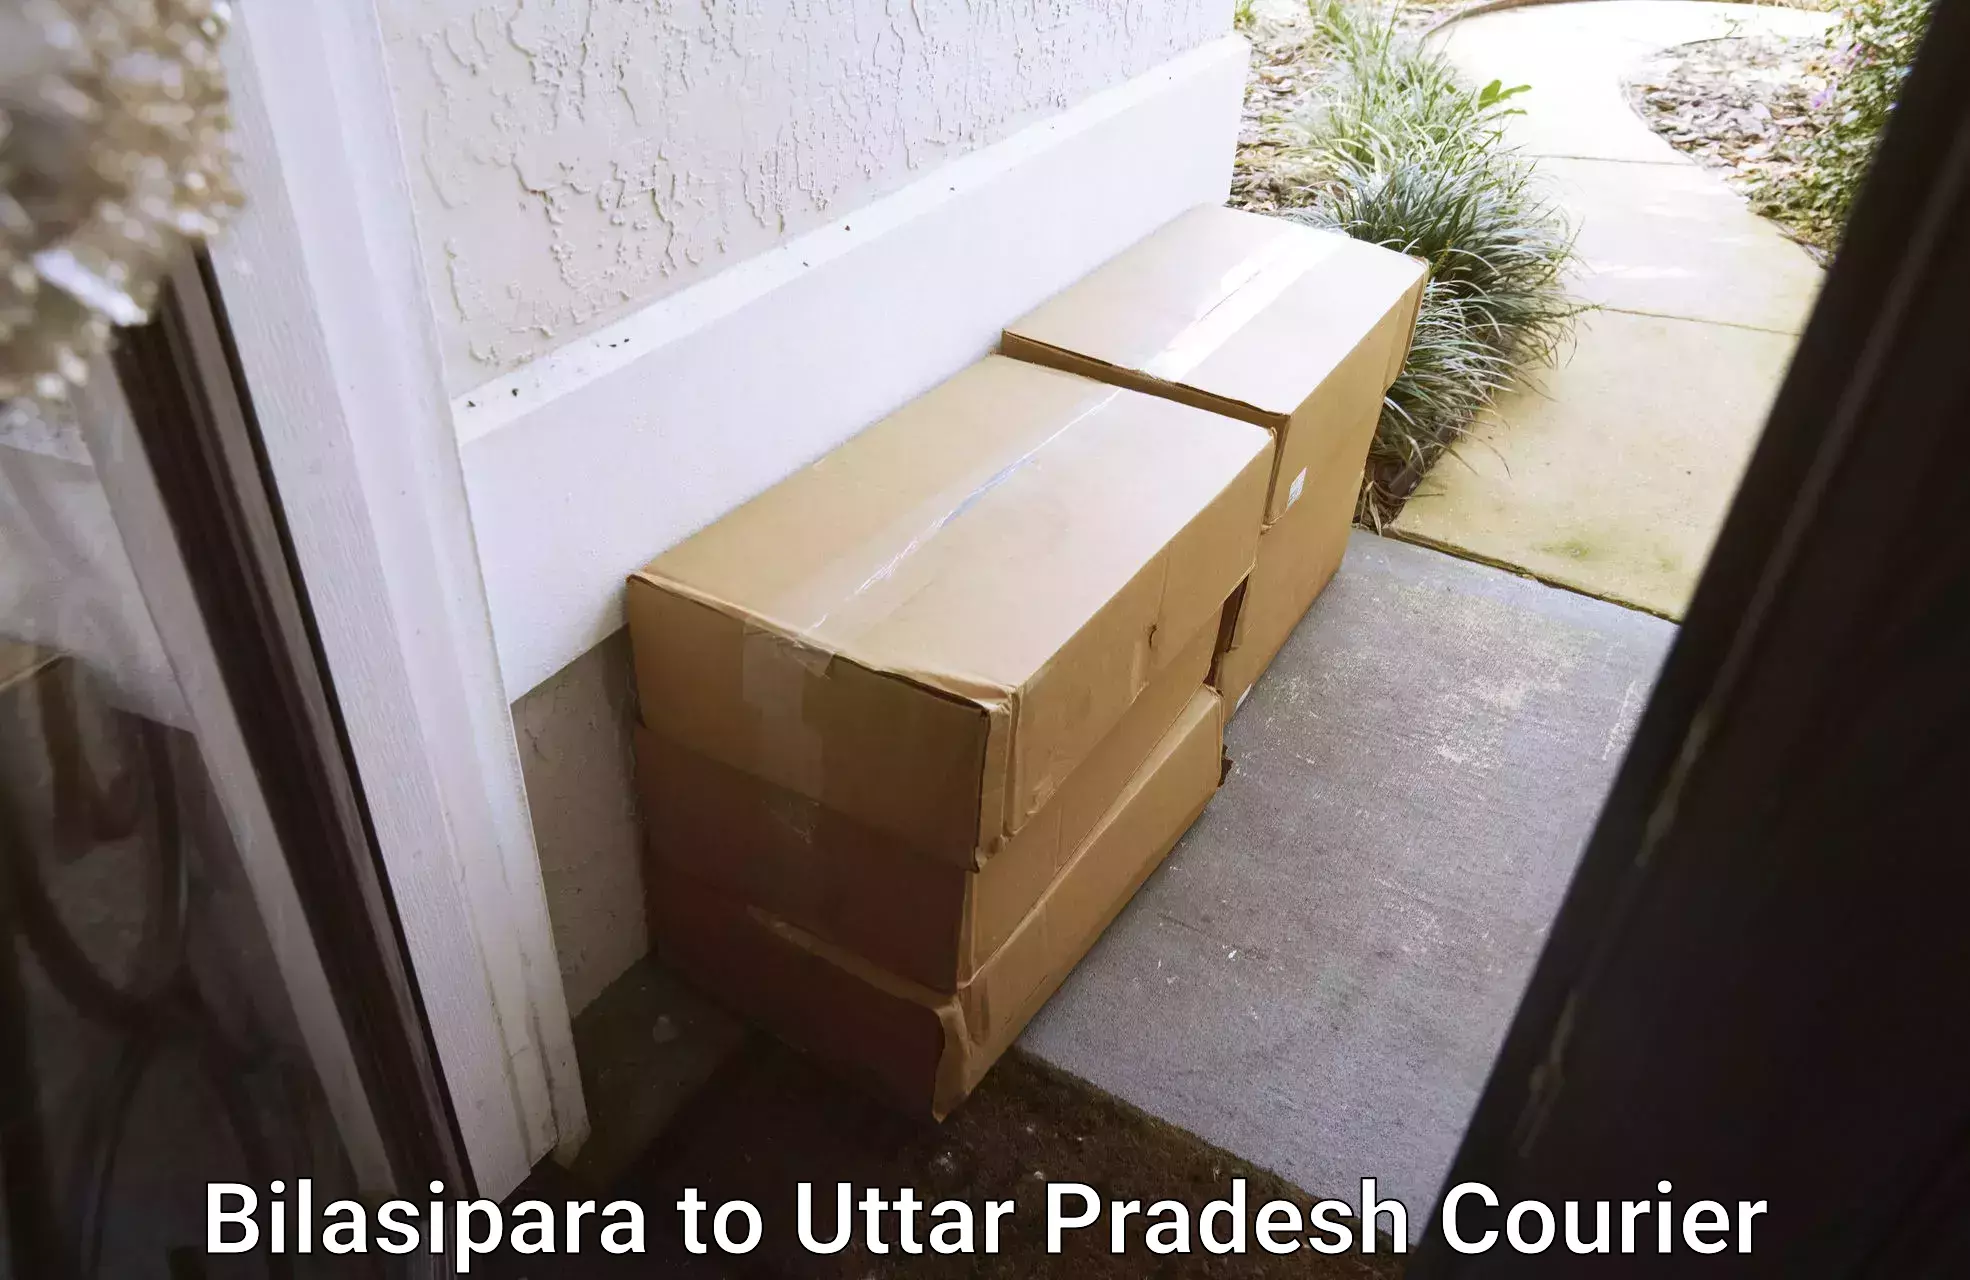 Business courier solutions Bilasipara to Agra